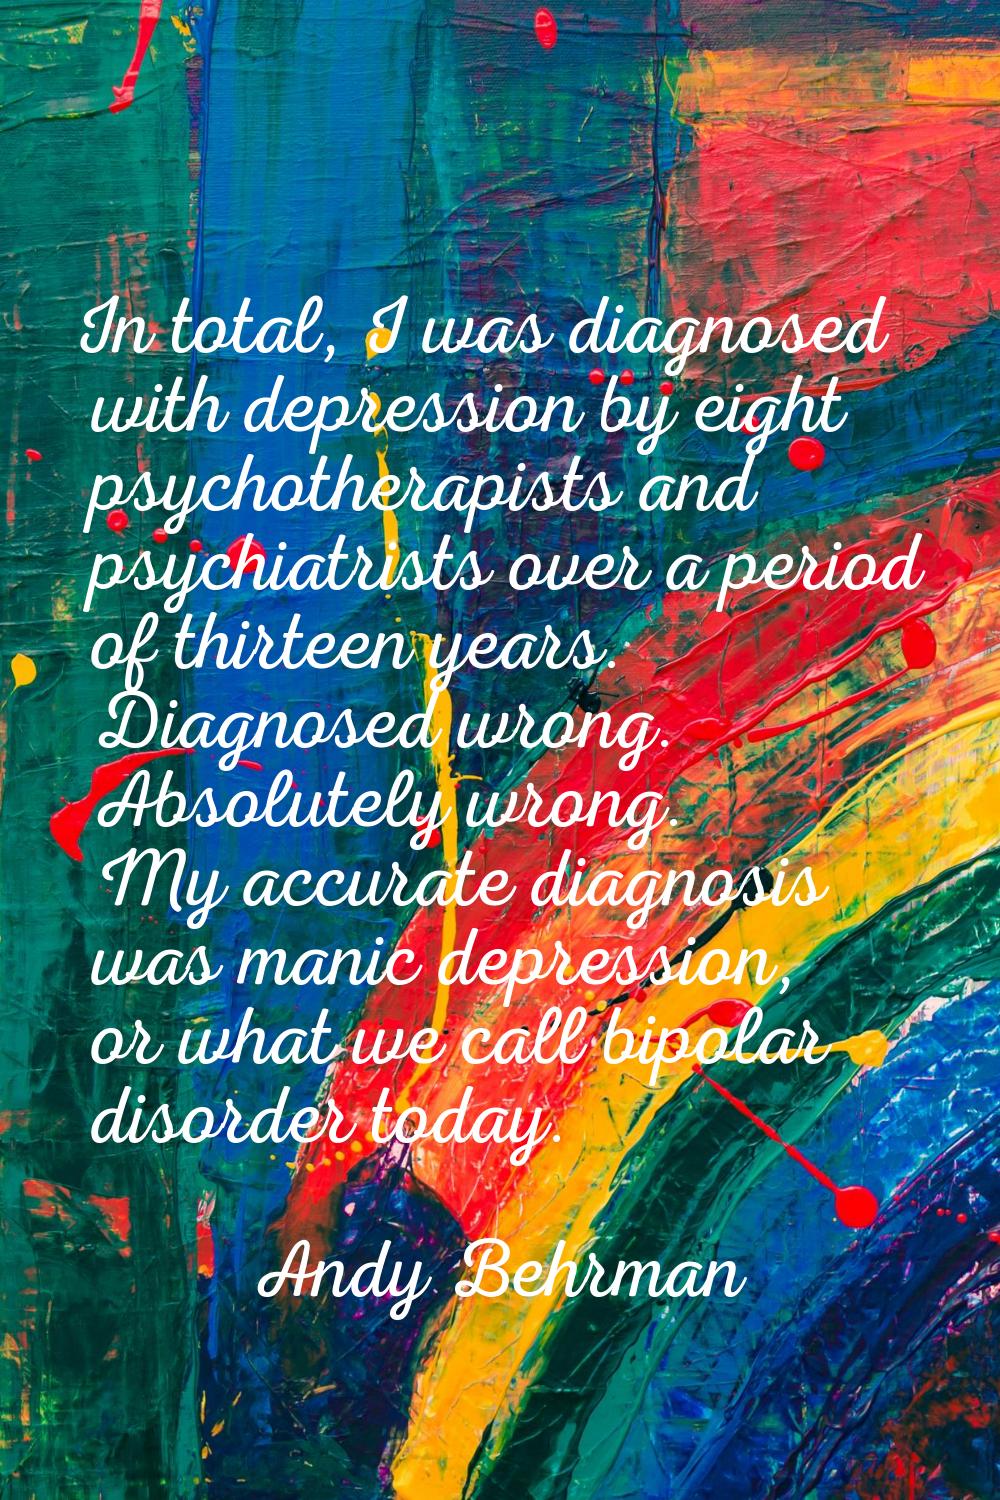 In total, I was diagnosed with depression by eight psychotherapists and psychiatrists over a period